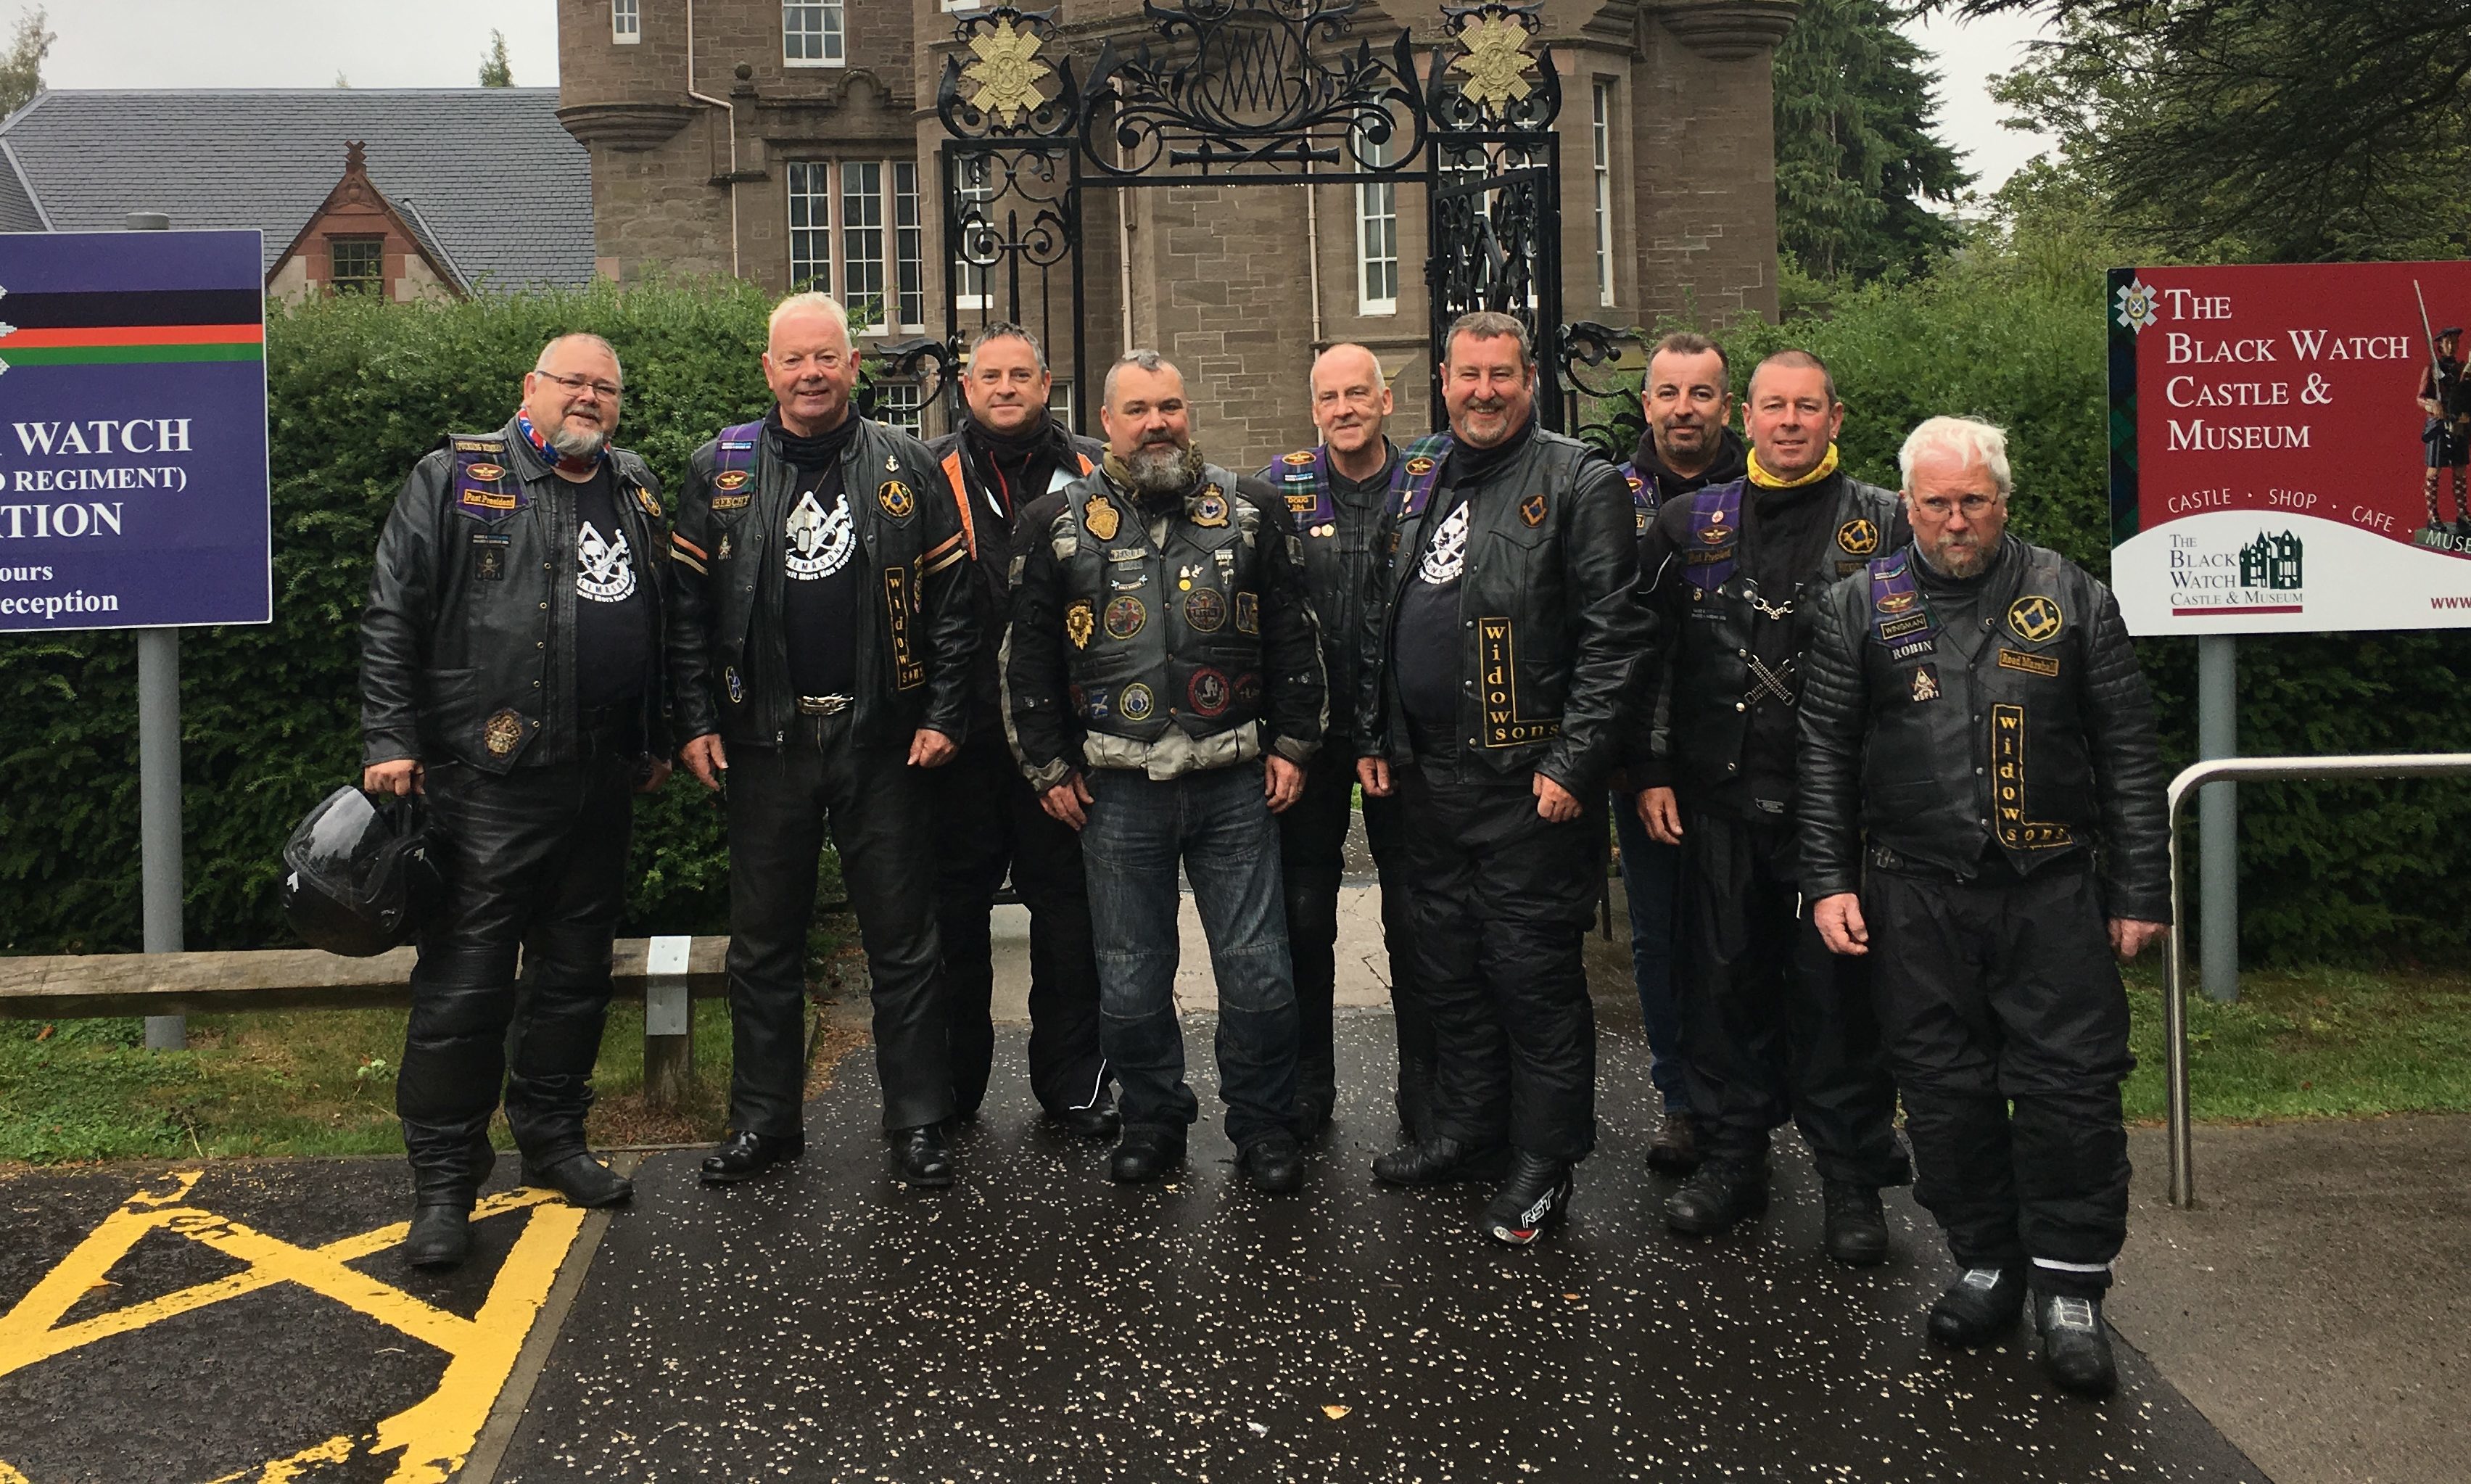 A group of big-hearted bikers took part in wreath laying ceremony at Balhousie Castle, the regimental headquarters and museum of The Black Watch, as part of a fundraising effort to raise £60,000 for Poppyscotland, whilst also commemorating the centenary of the end of the First World War.